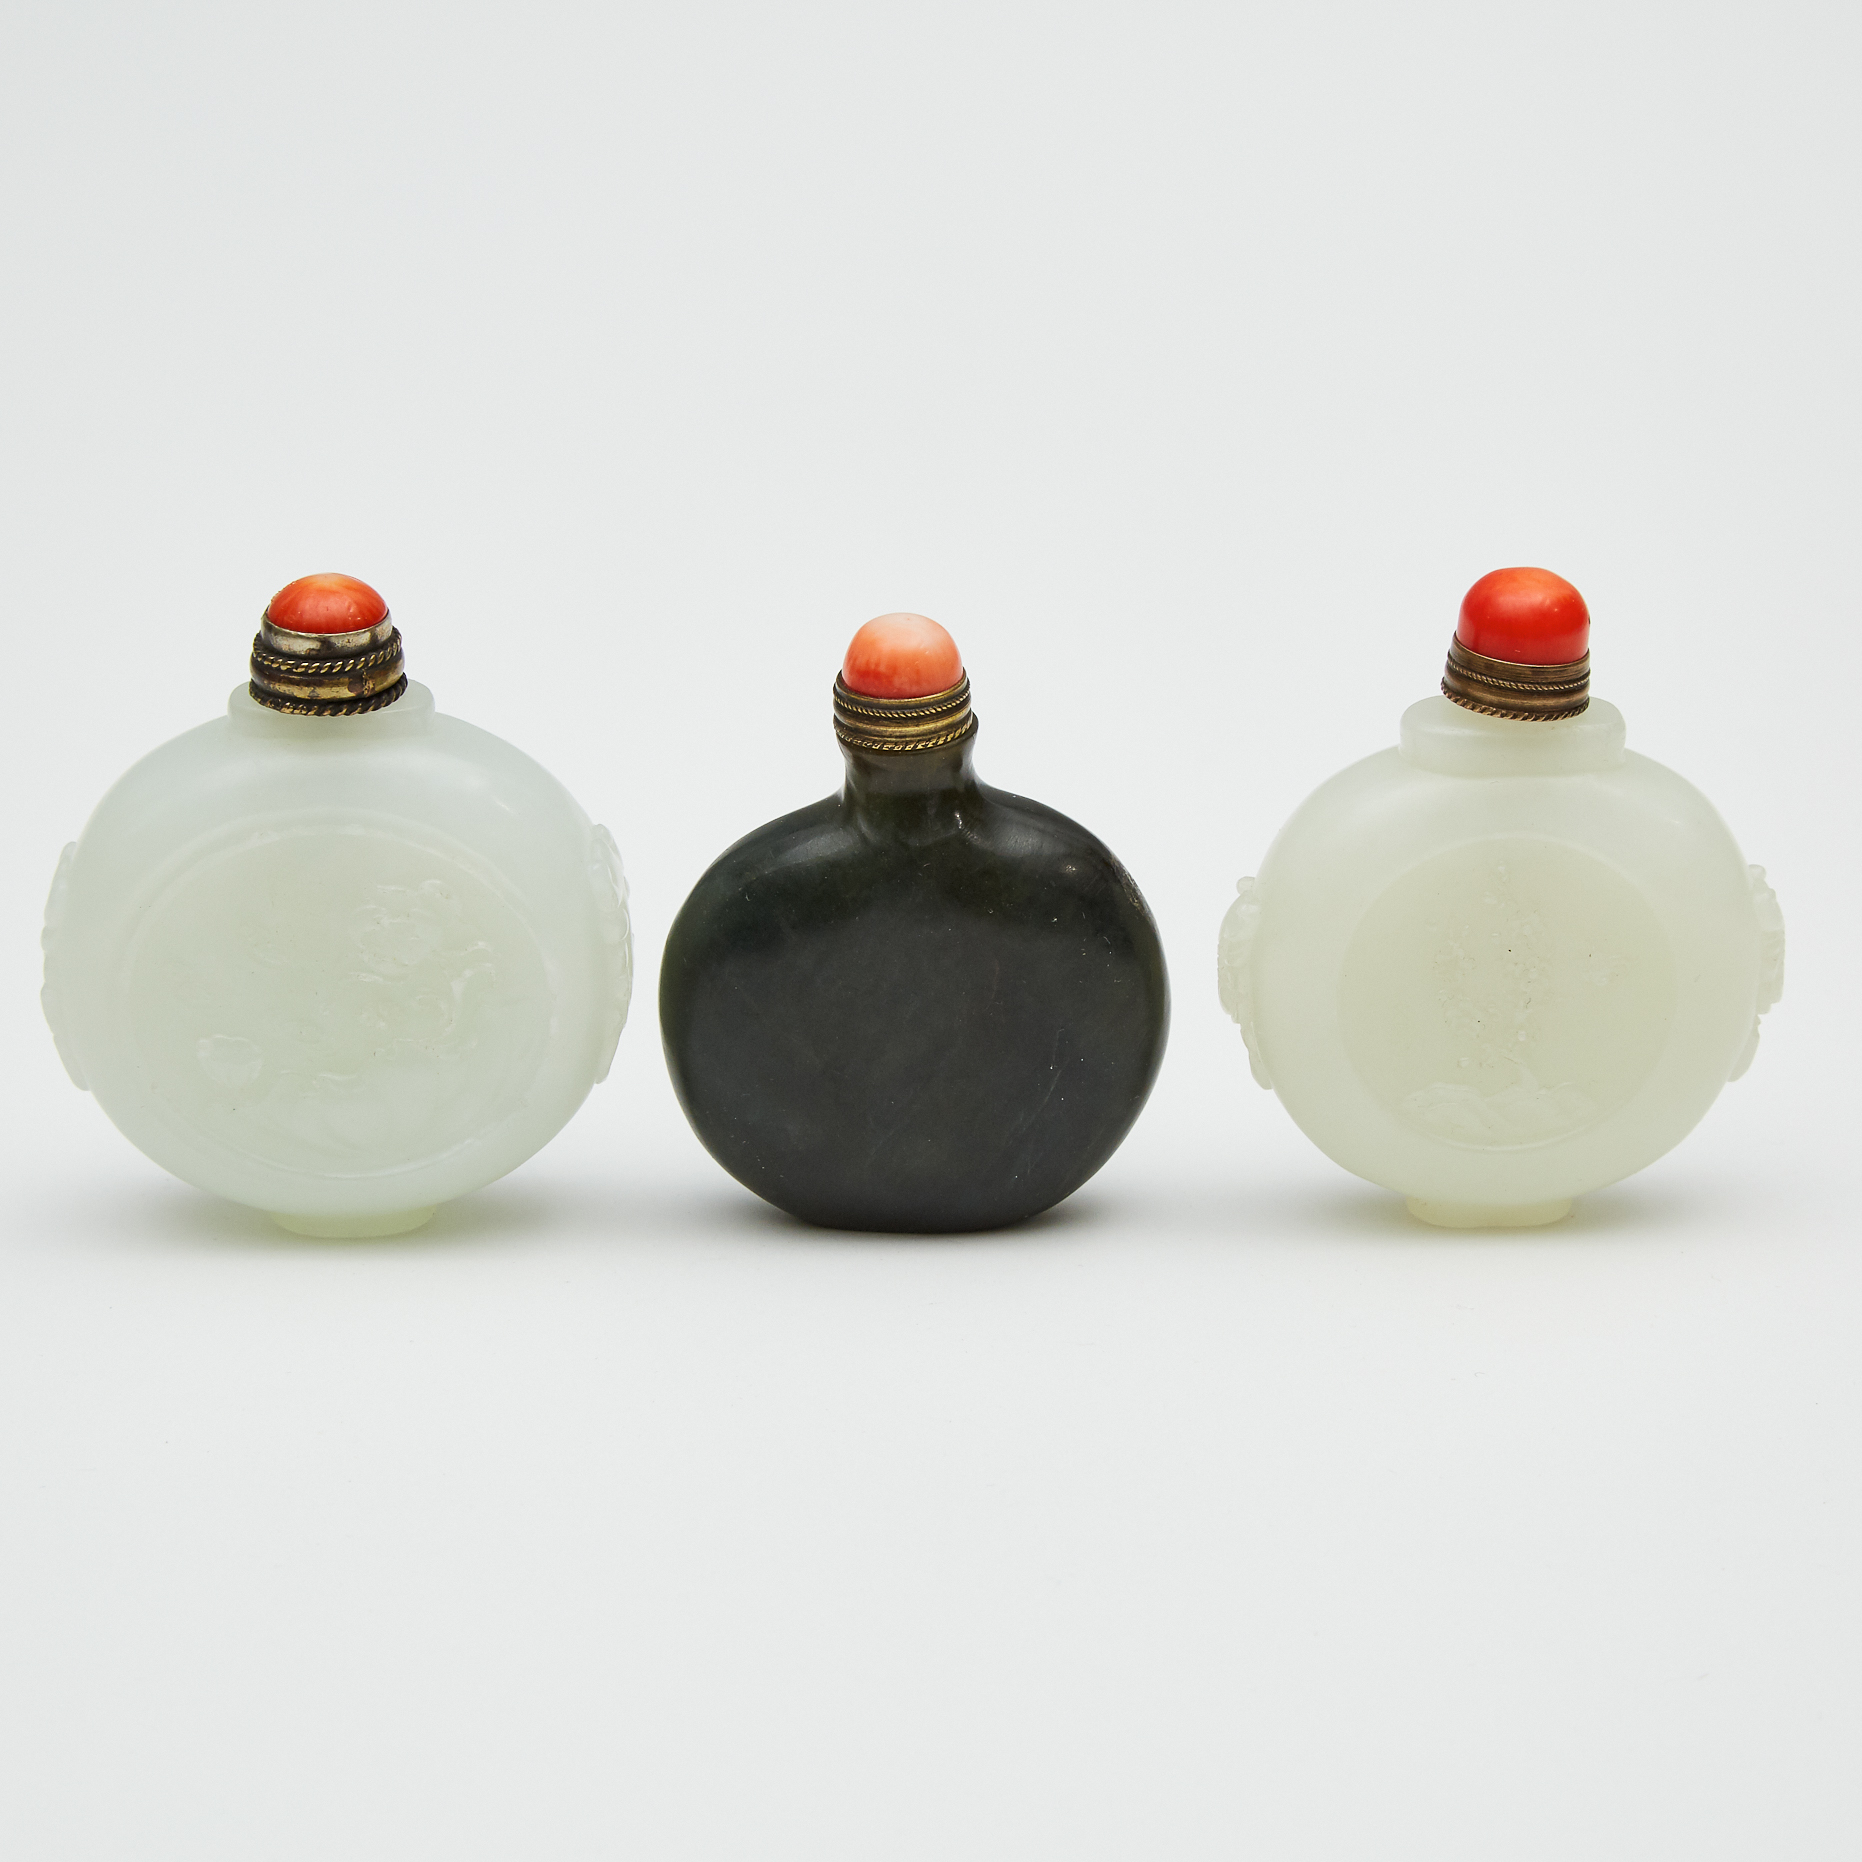 A Group of Three Jade Snuff Bottles